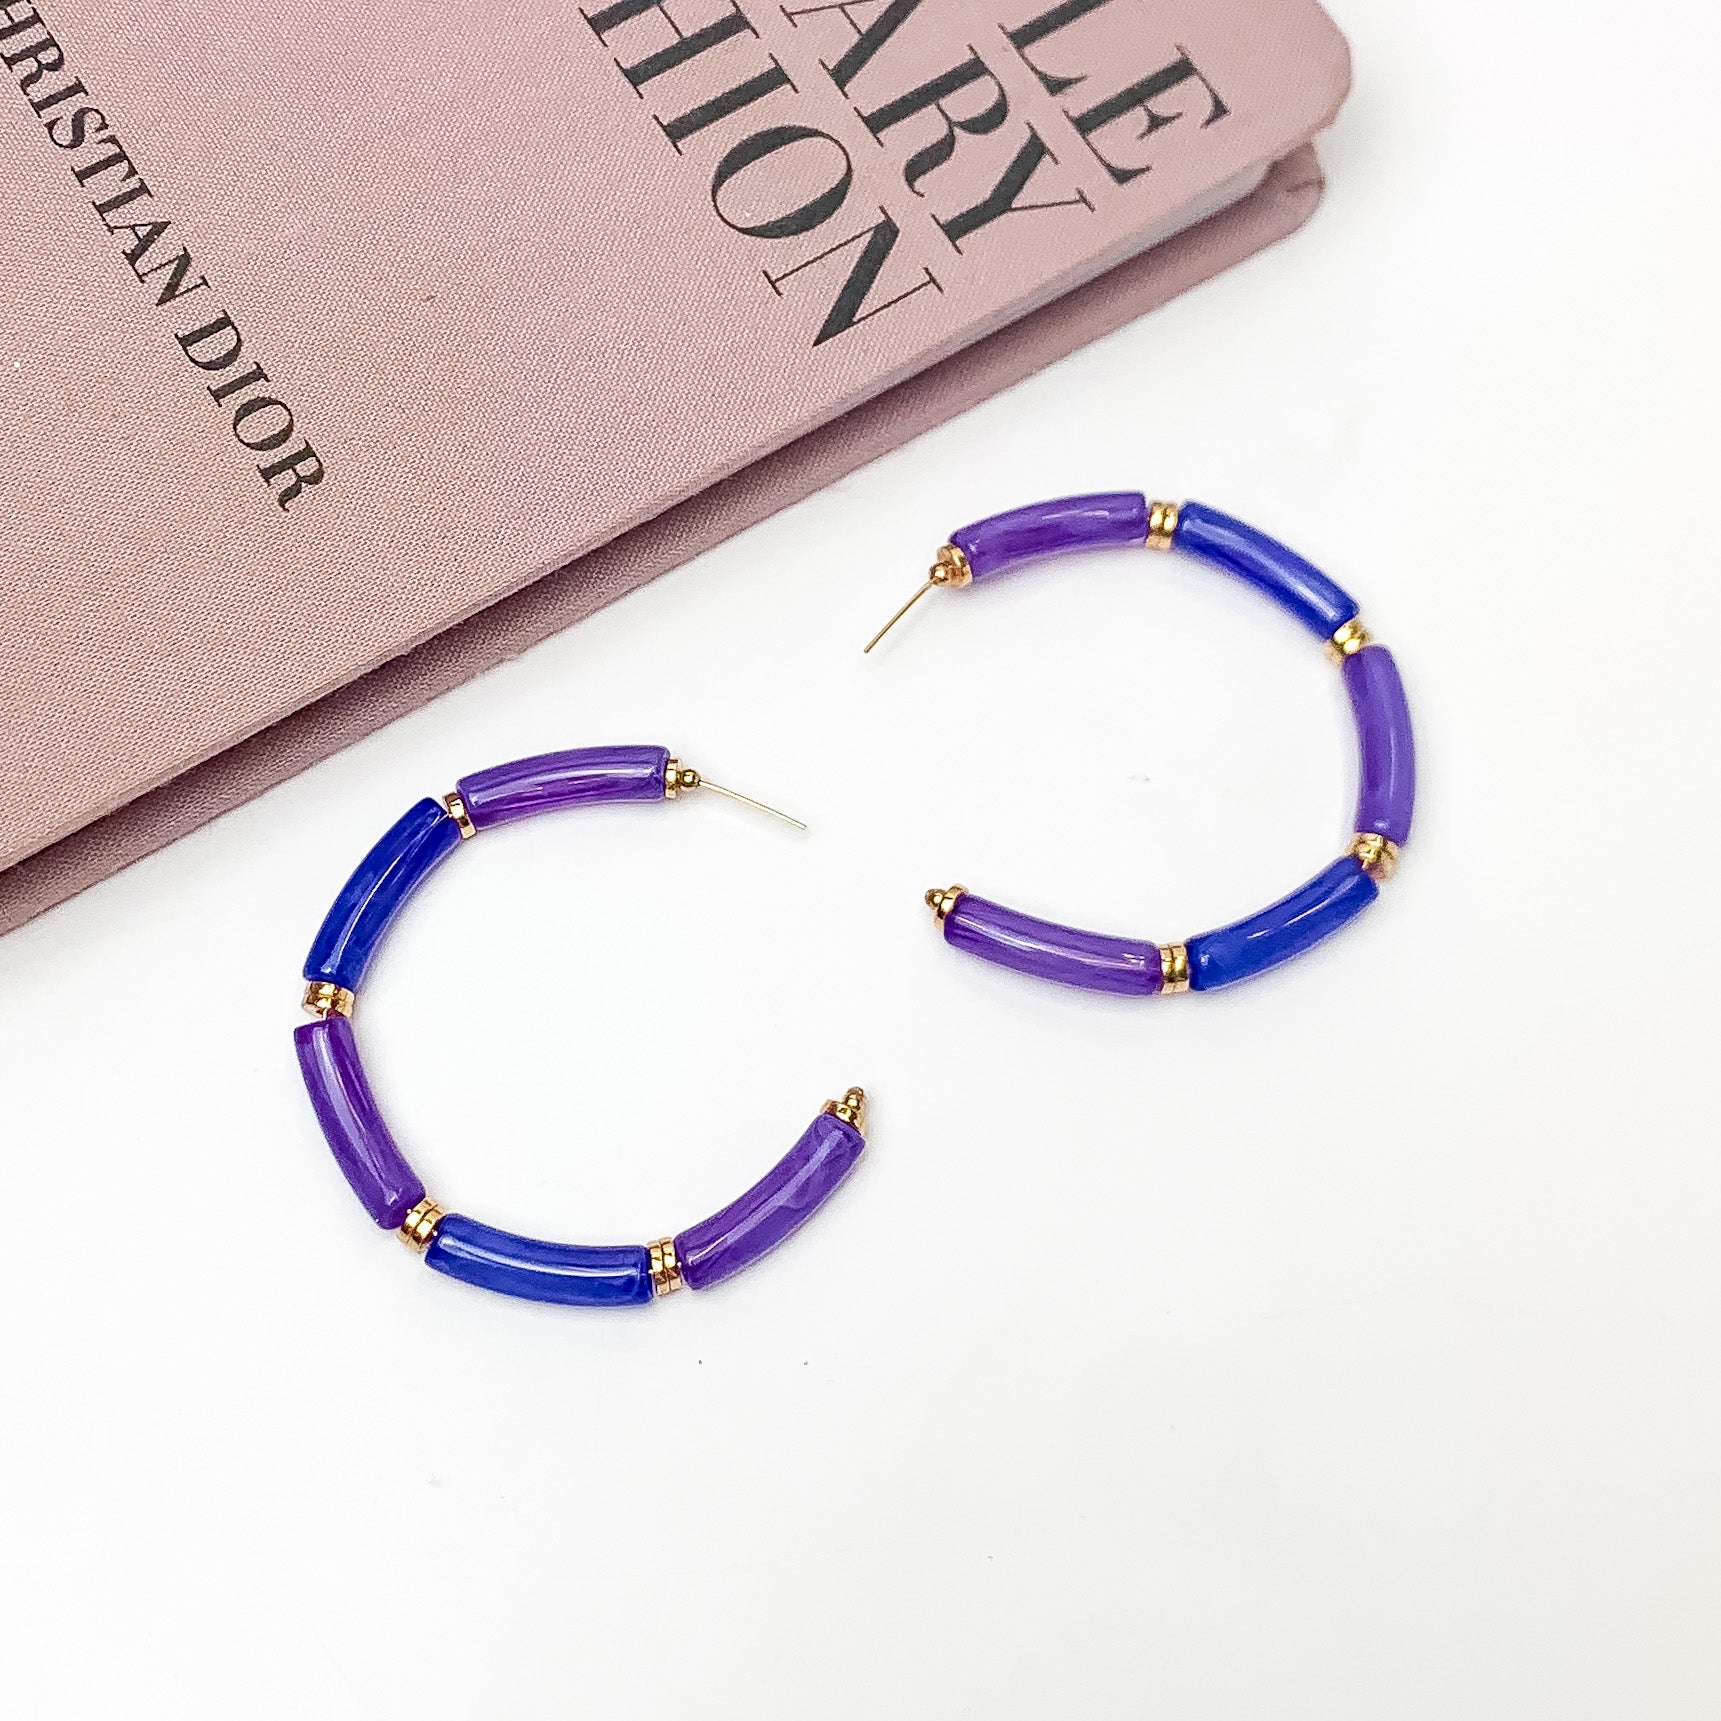 Island Style Tube Beaded Hoop Earrings Purple. Pictured on a white background with a book in the top left corner.